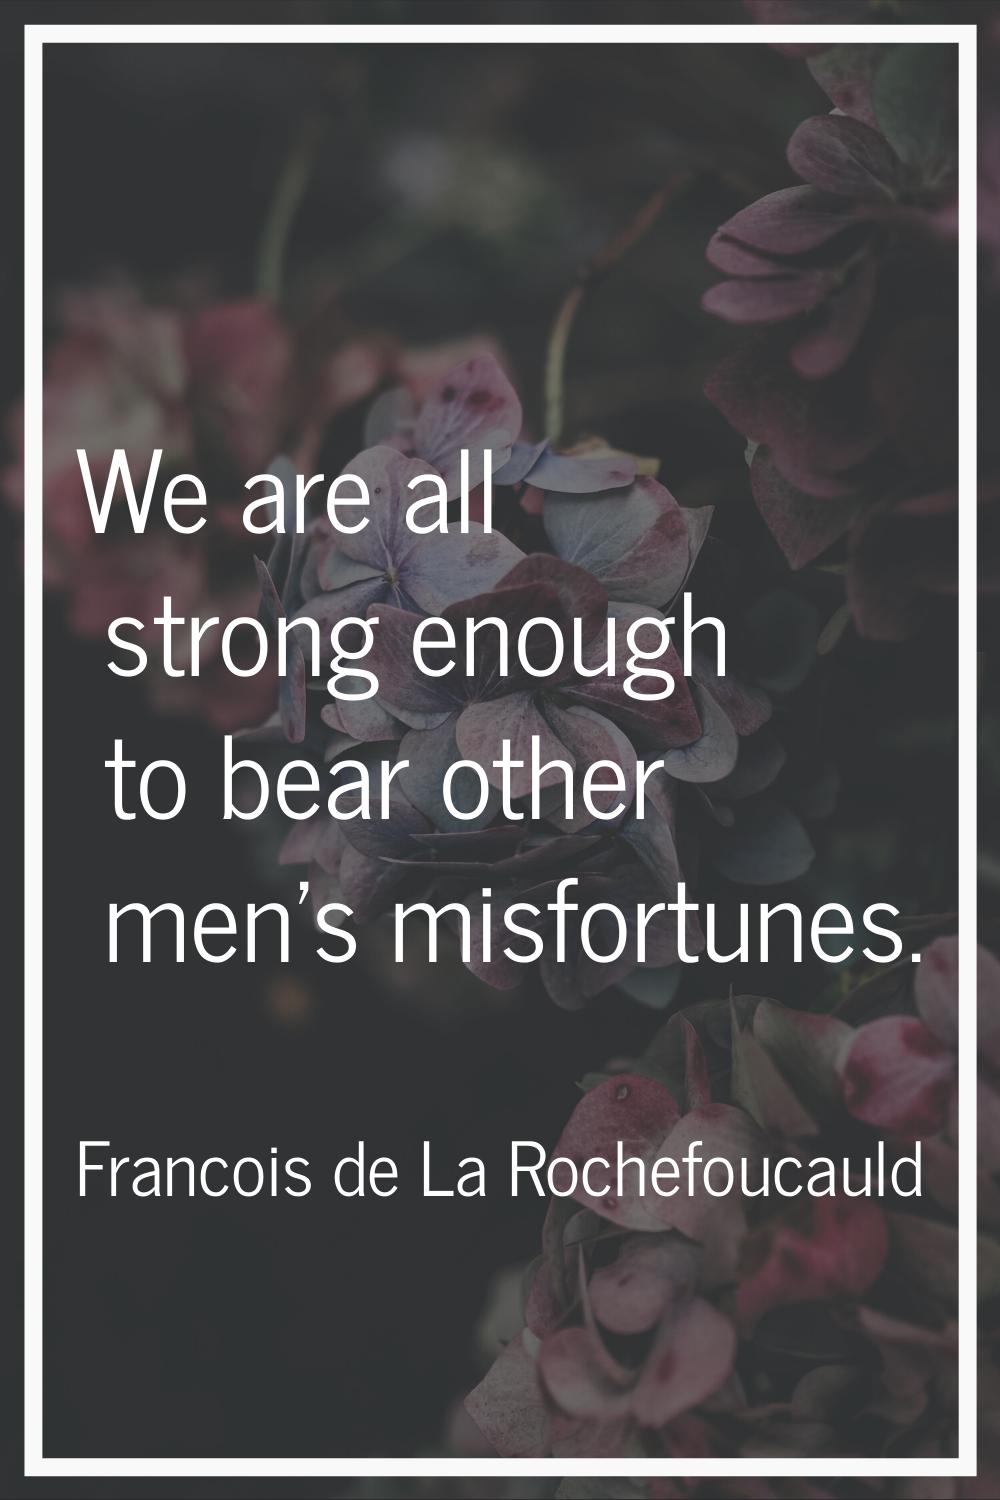 We are all strong enough to bear other men's misfortunes.